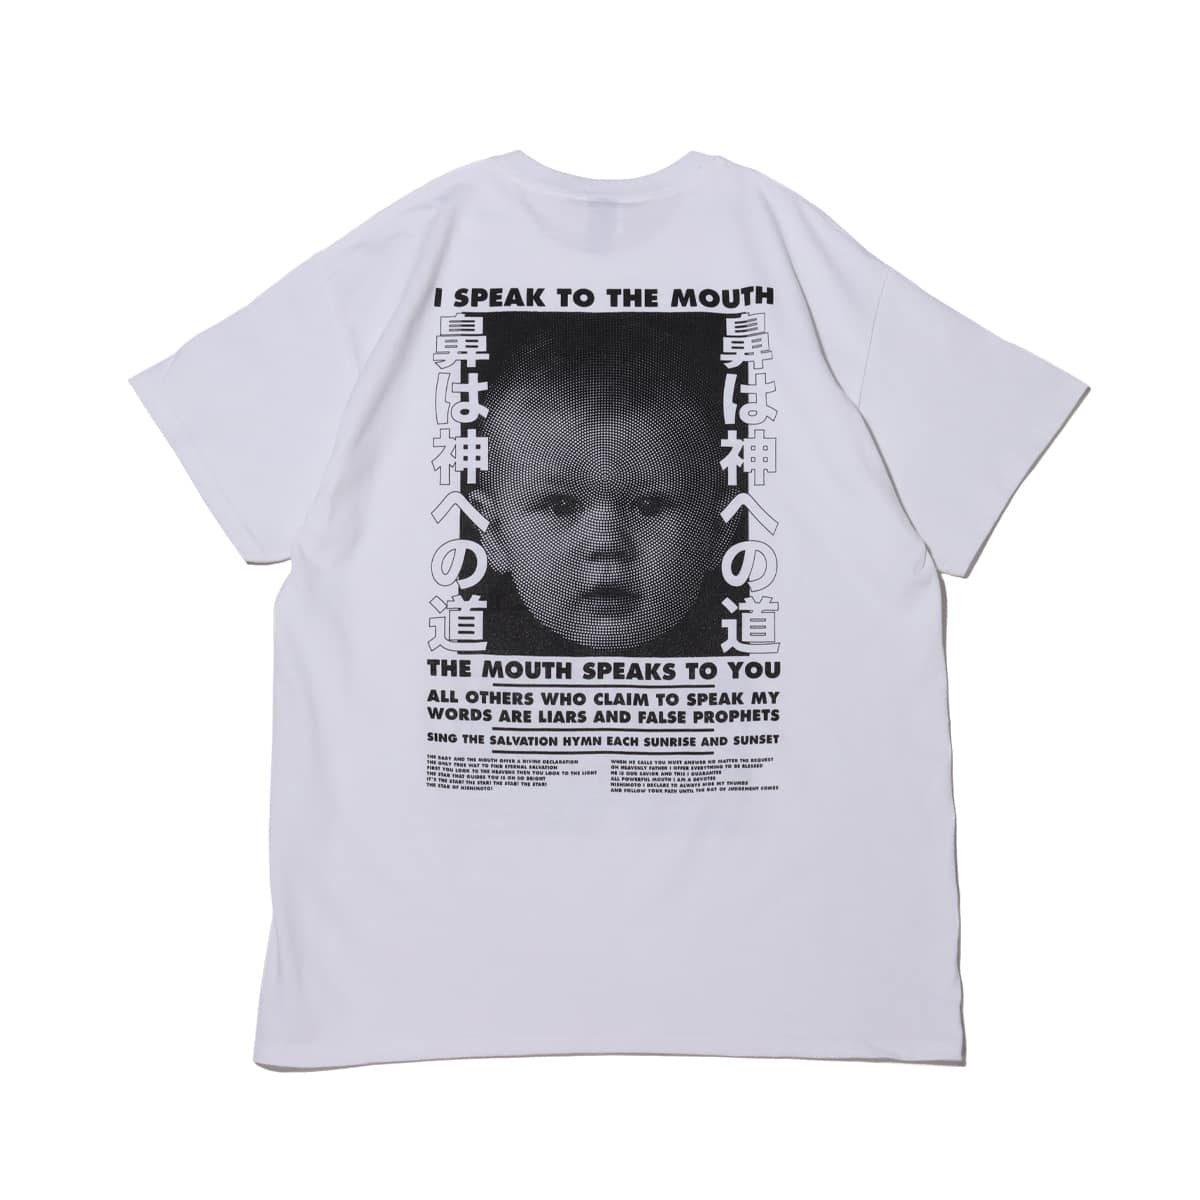 nishimoto is the mouth tシャツ　3点セット